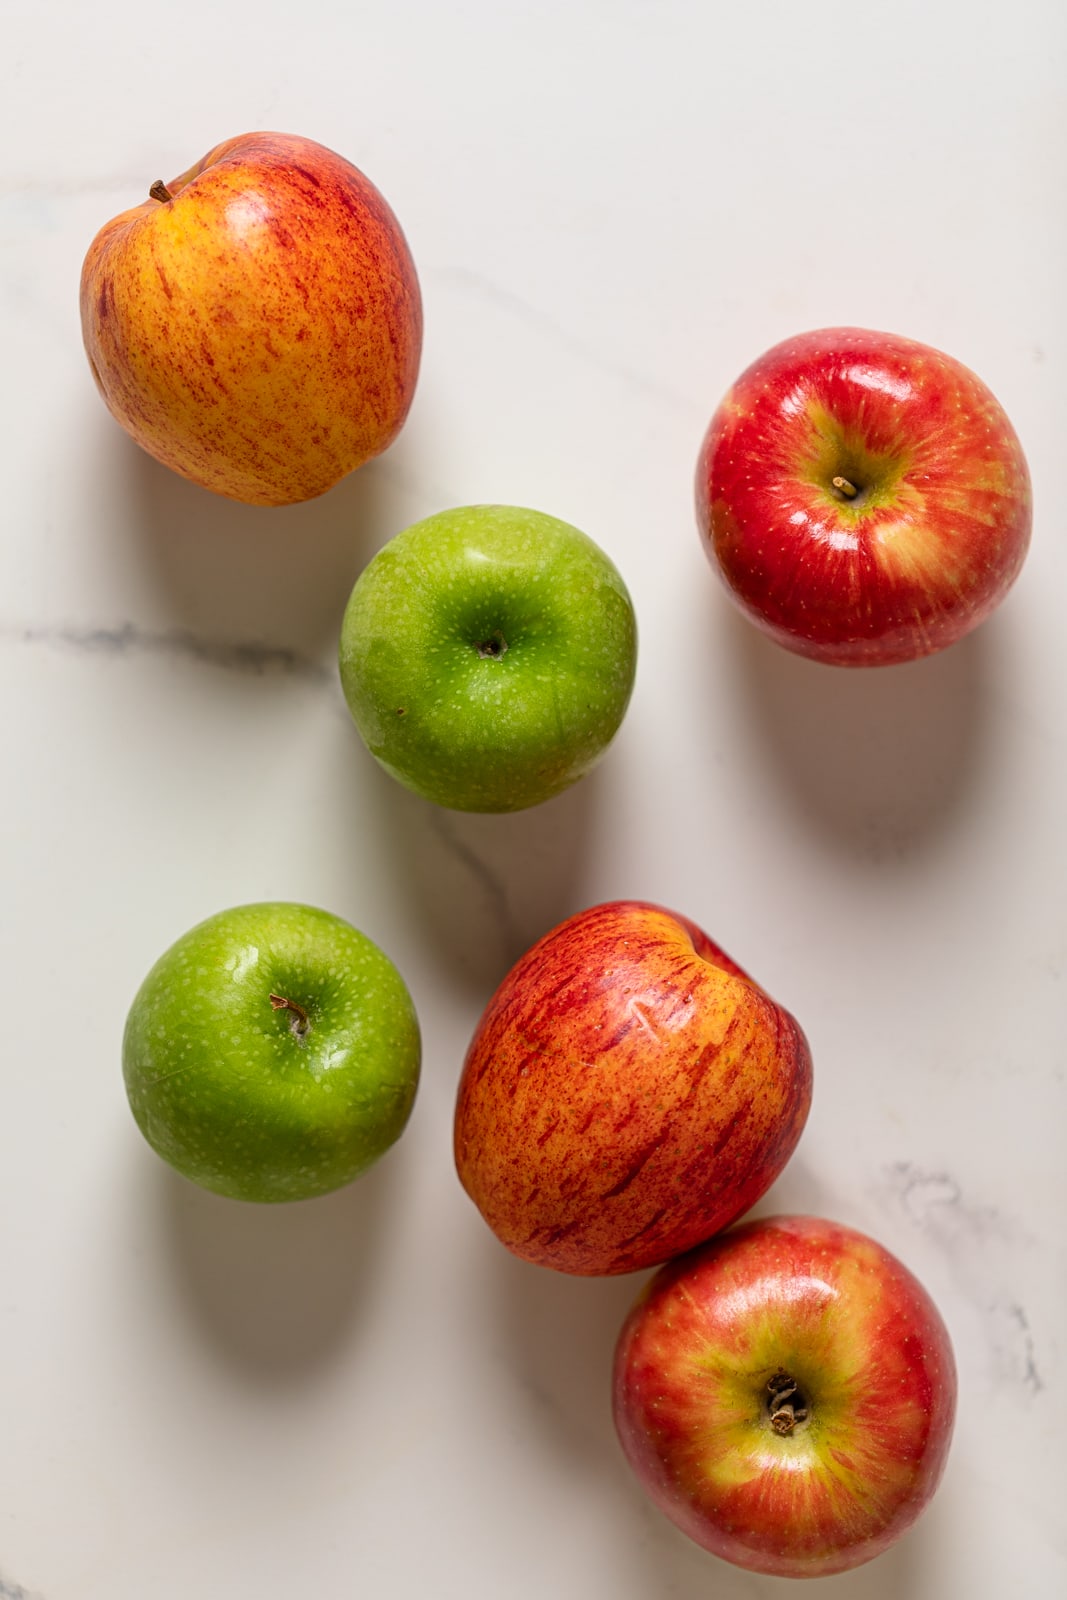 Green and red apples on a marble surface